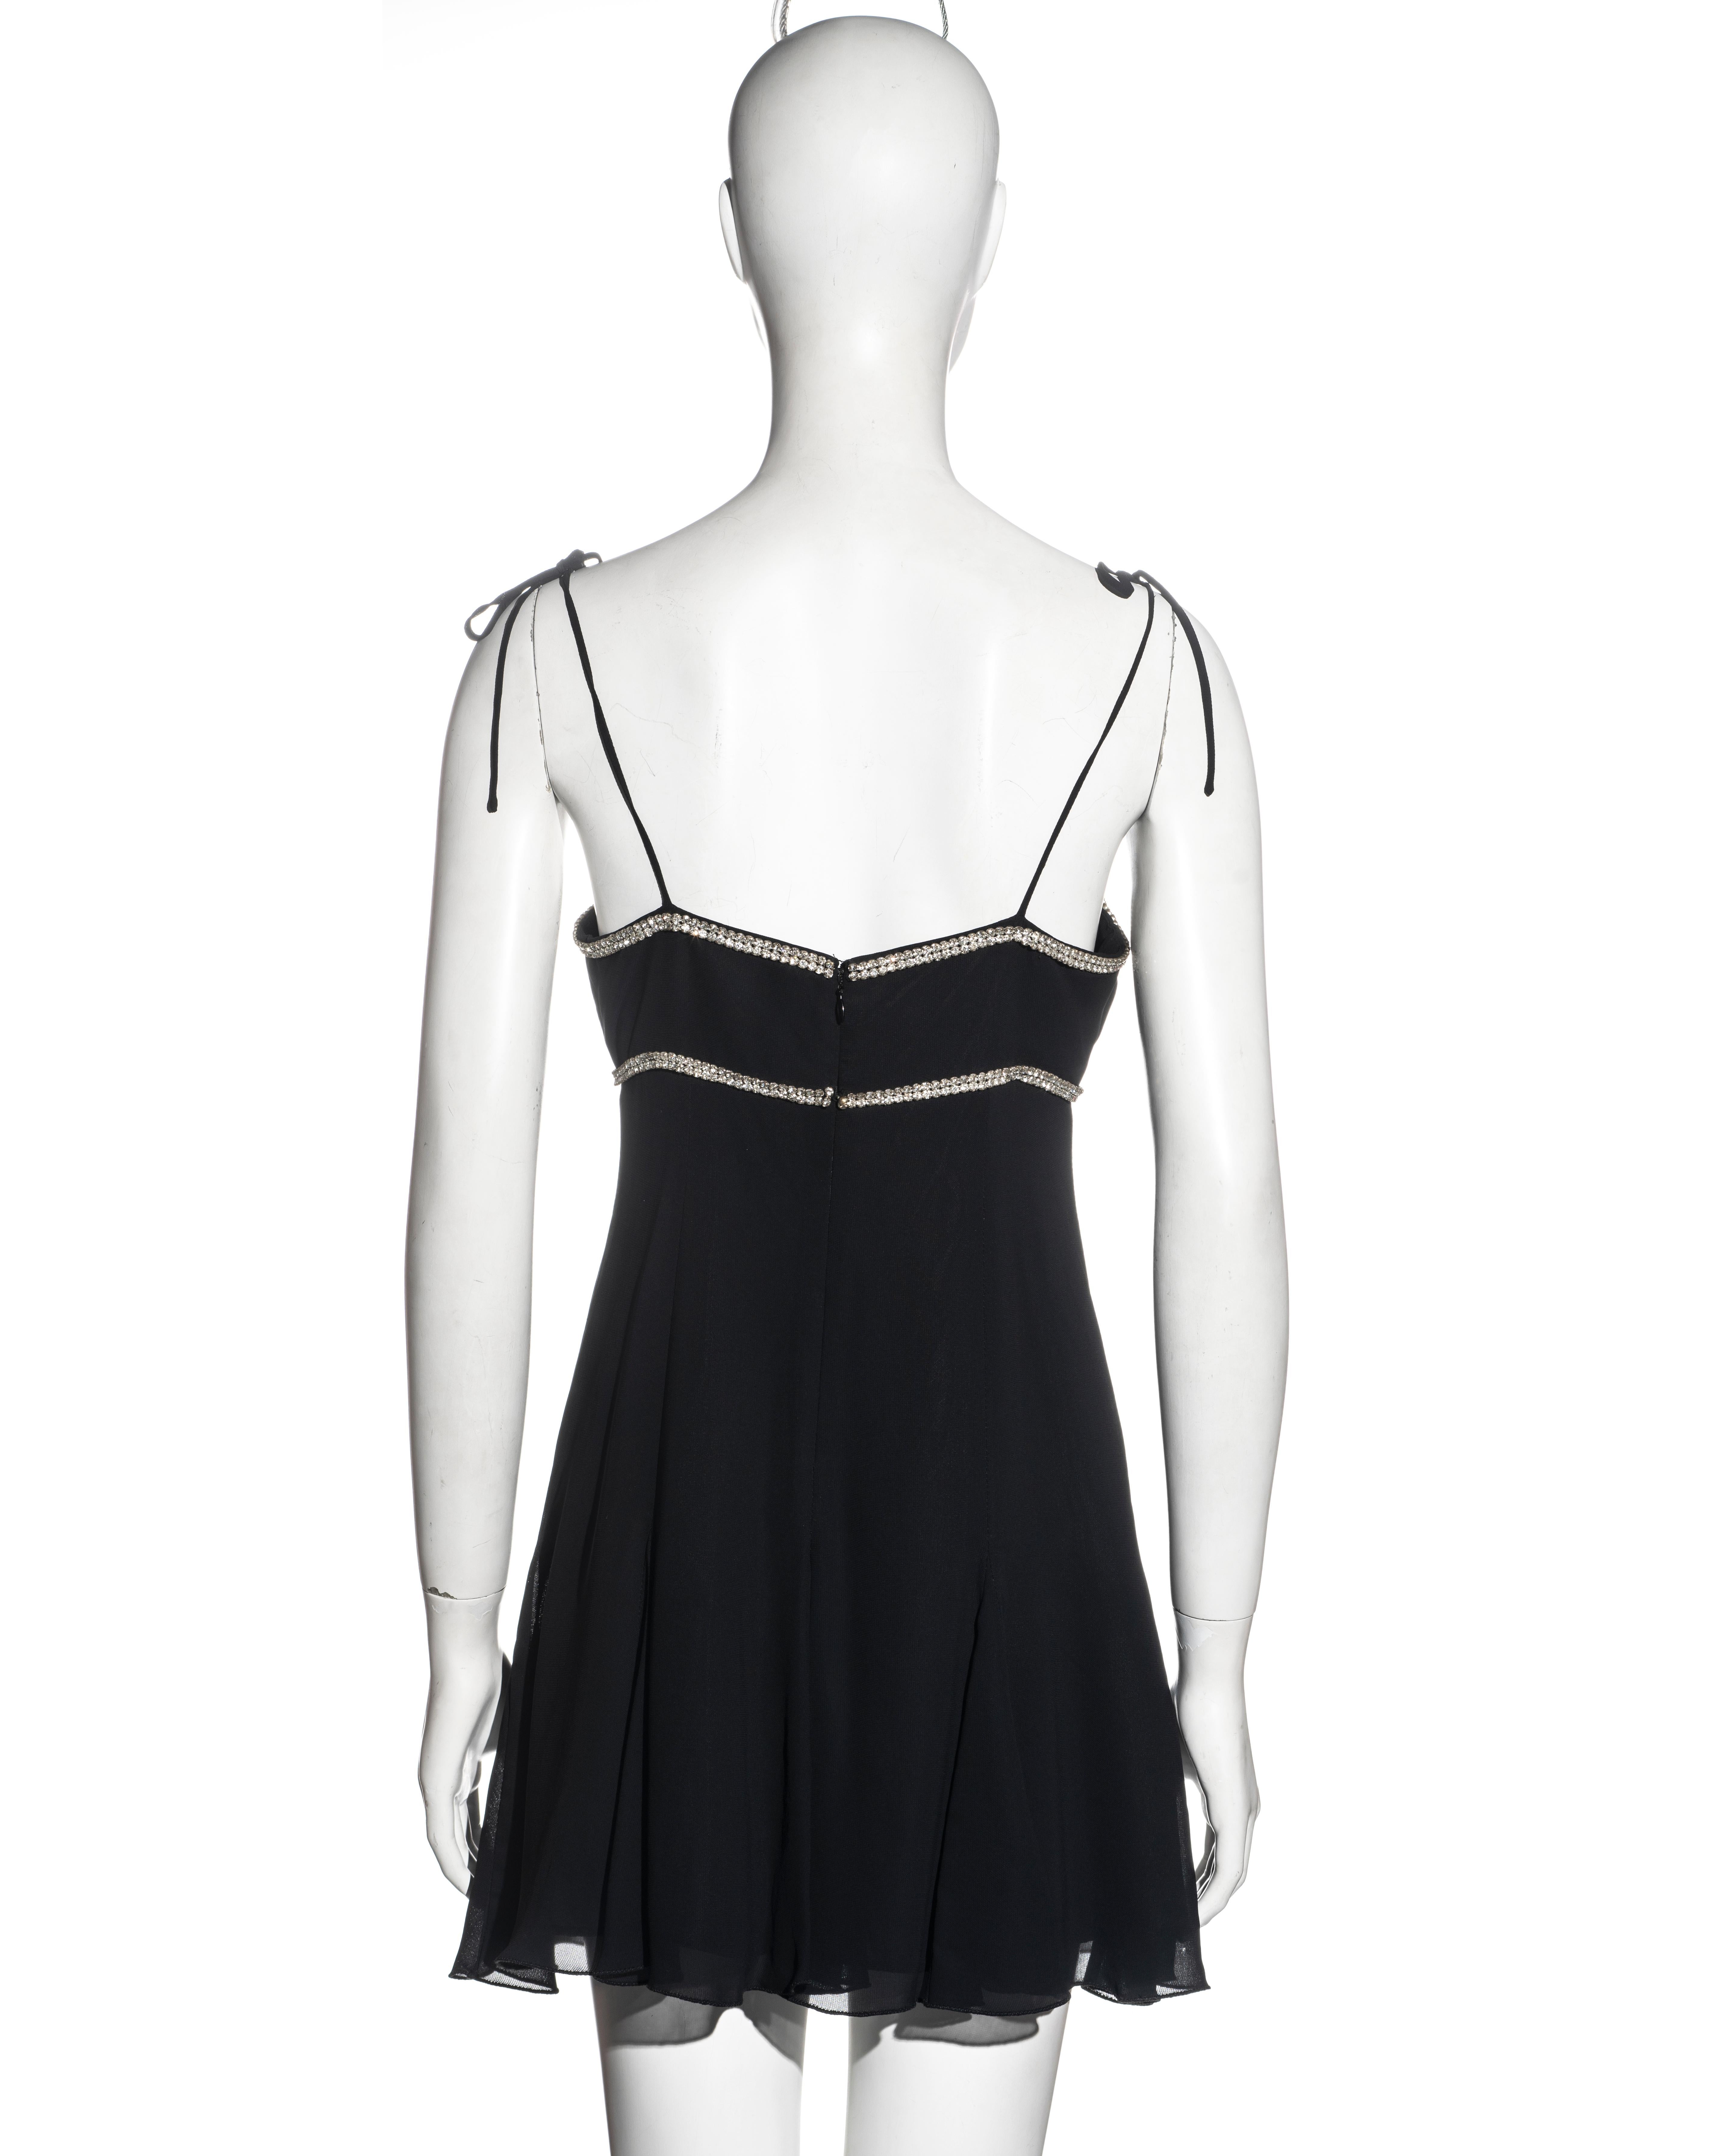 Dolce & Gabbana black rayon evening mini dress with crystal trim, ss 1995 For Sale 2